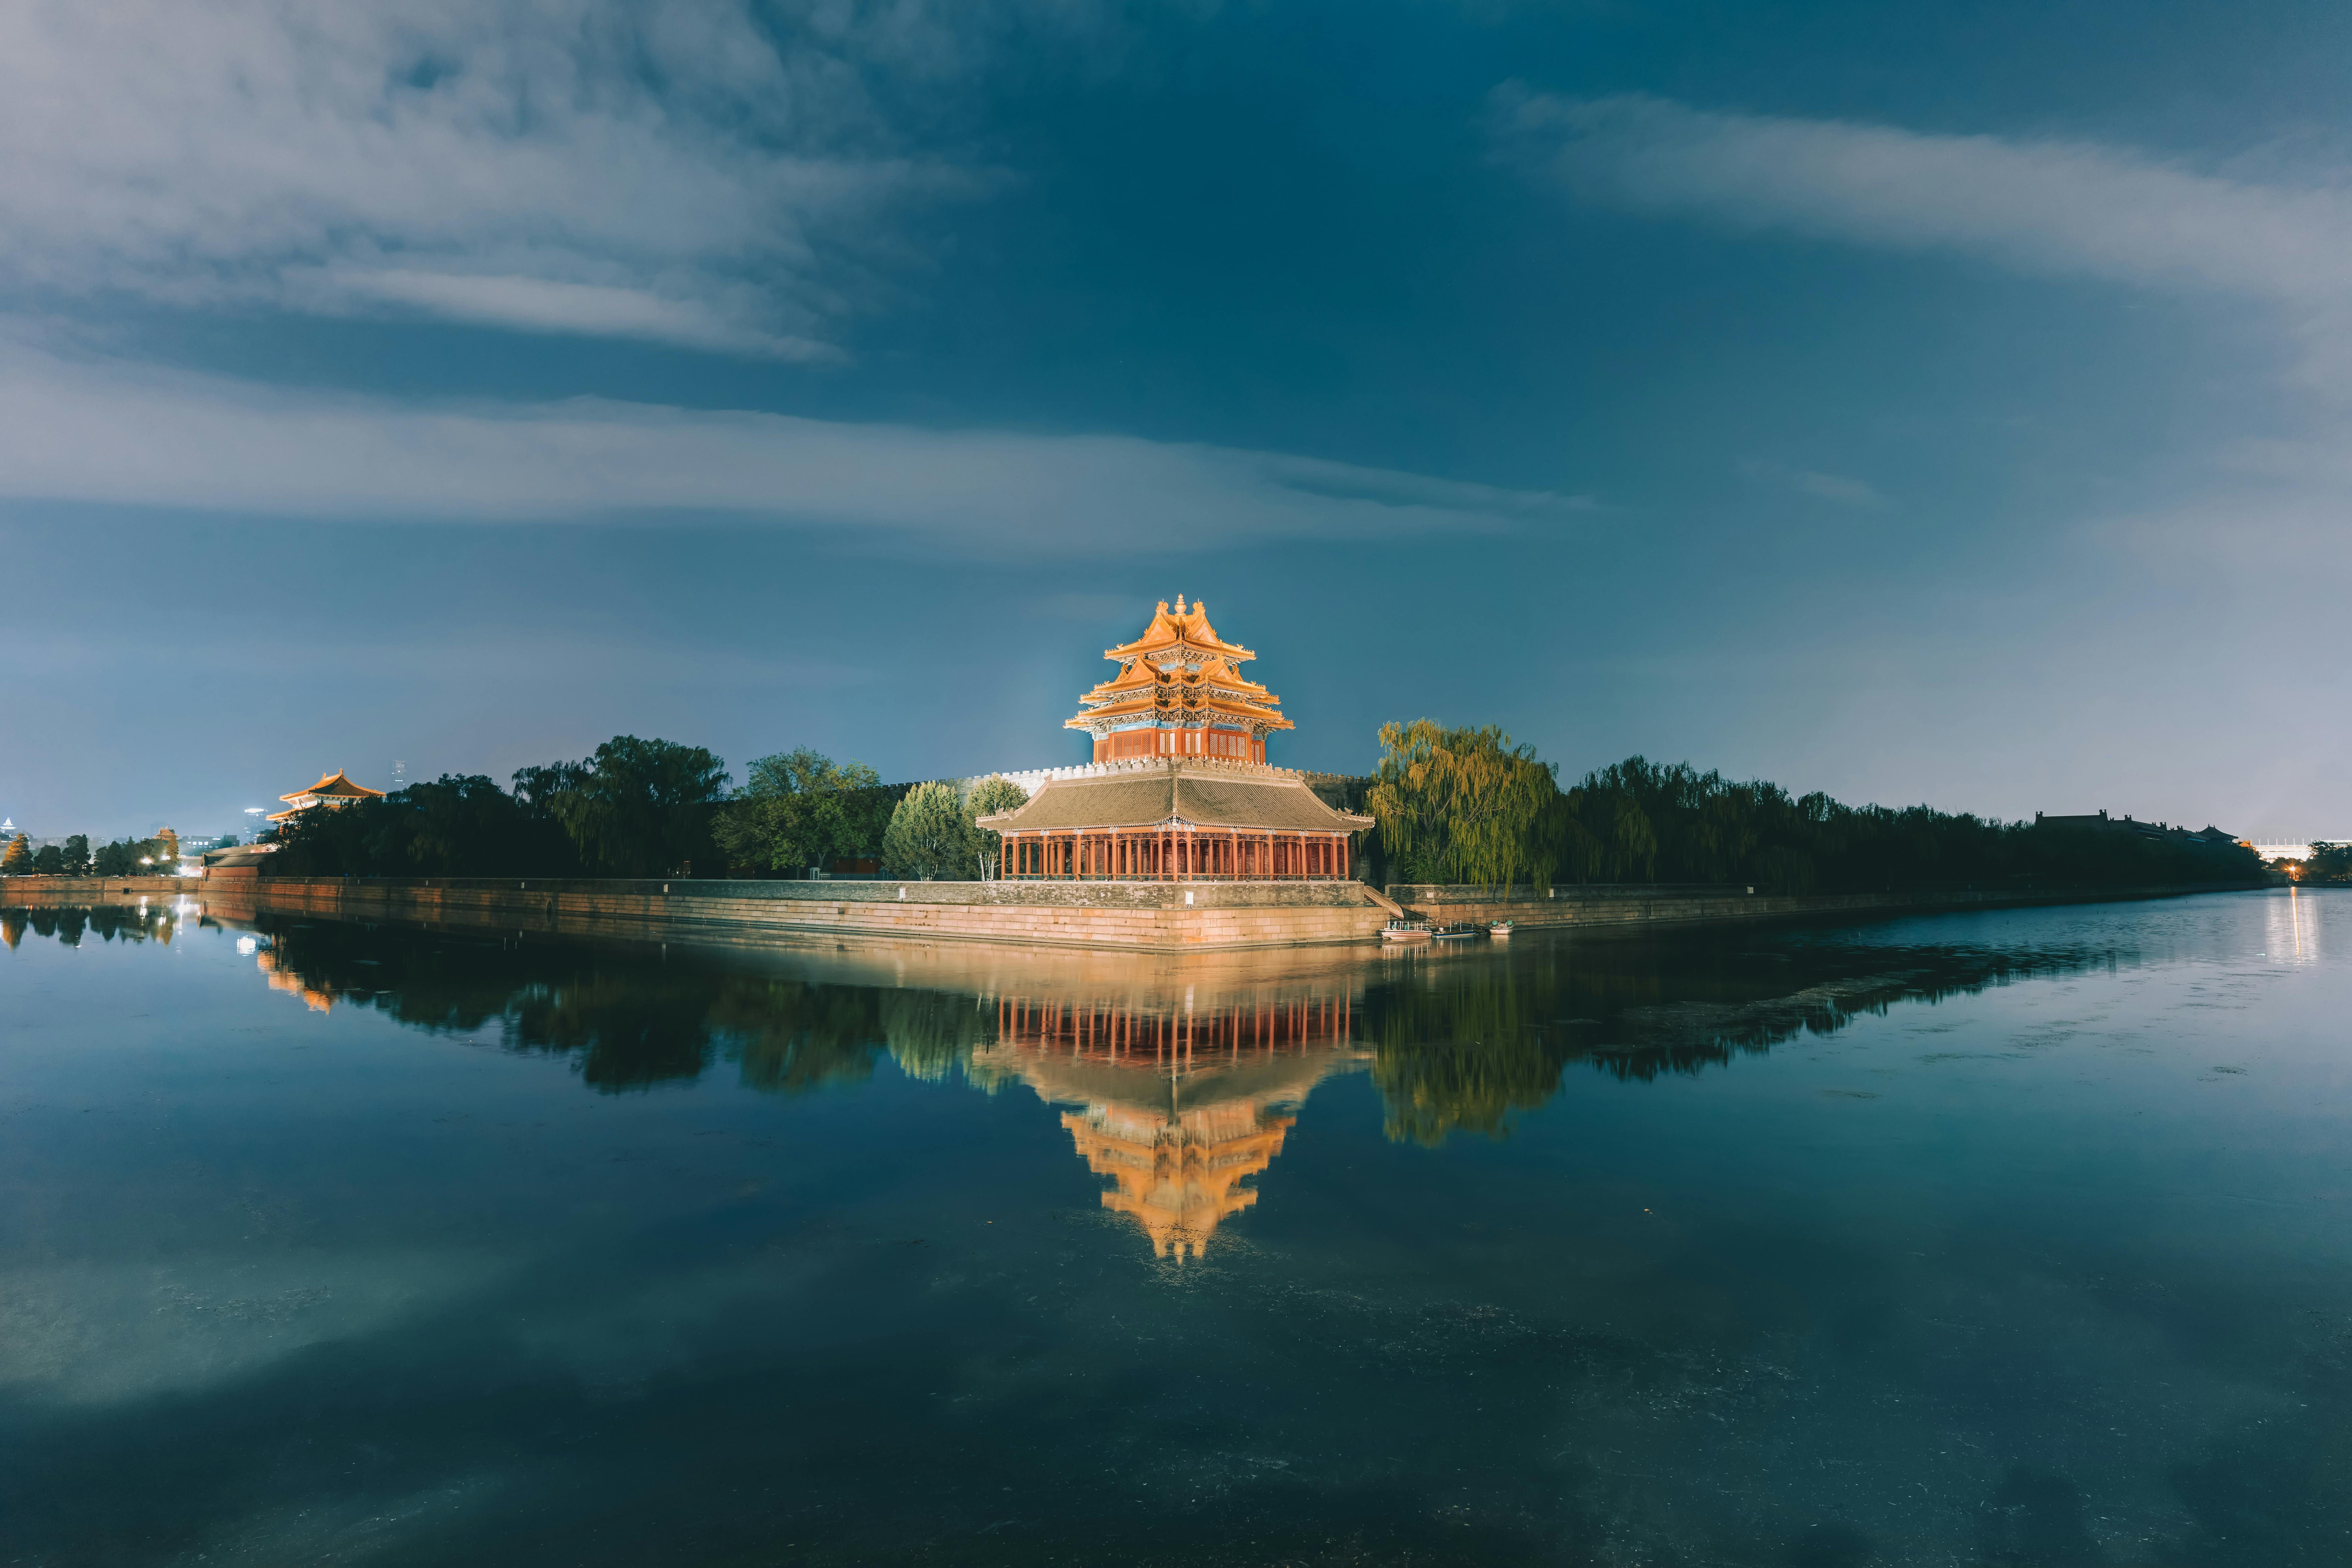 A View Of The Forbidden City Background Wallpaper Image For Free Download -  Pngtree